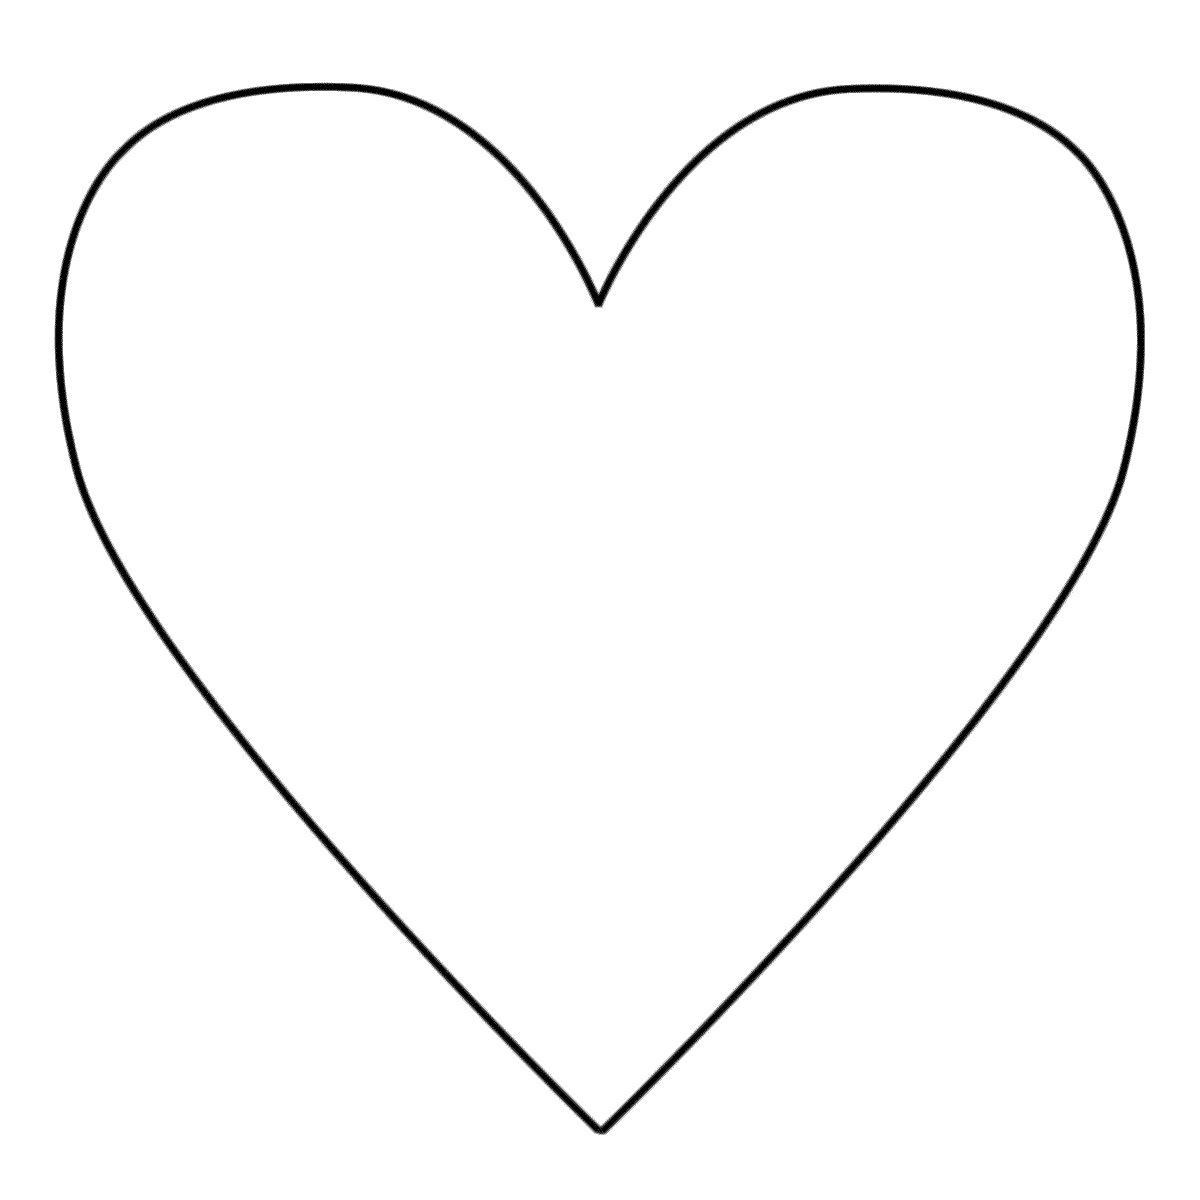 Heart Coloring Sheet For Kids